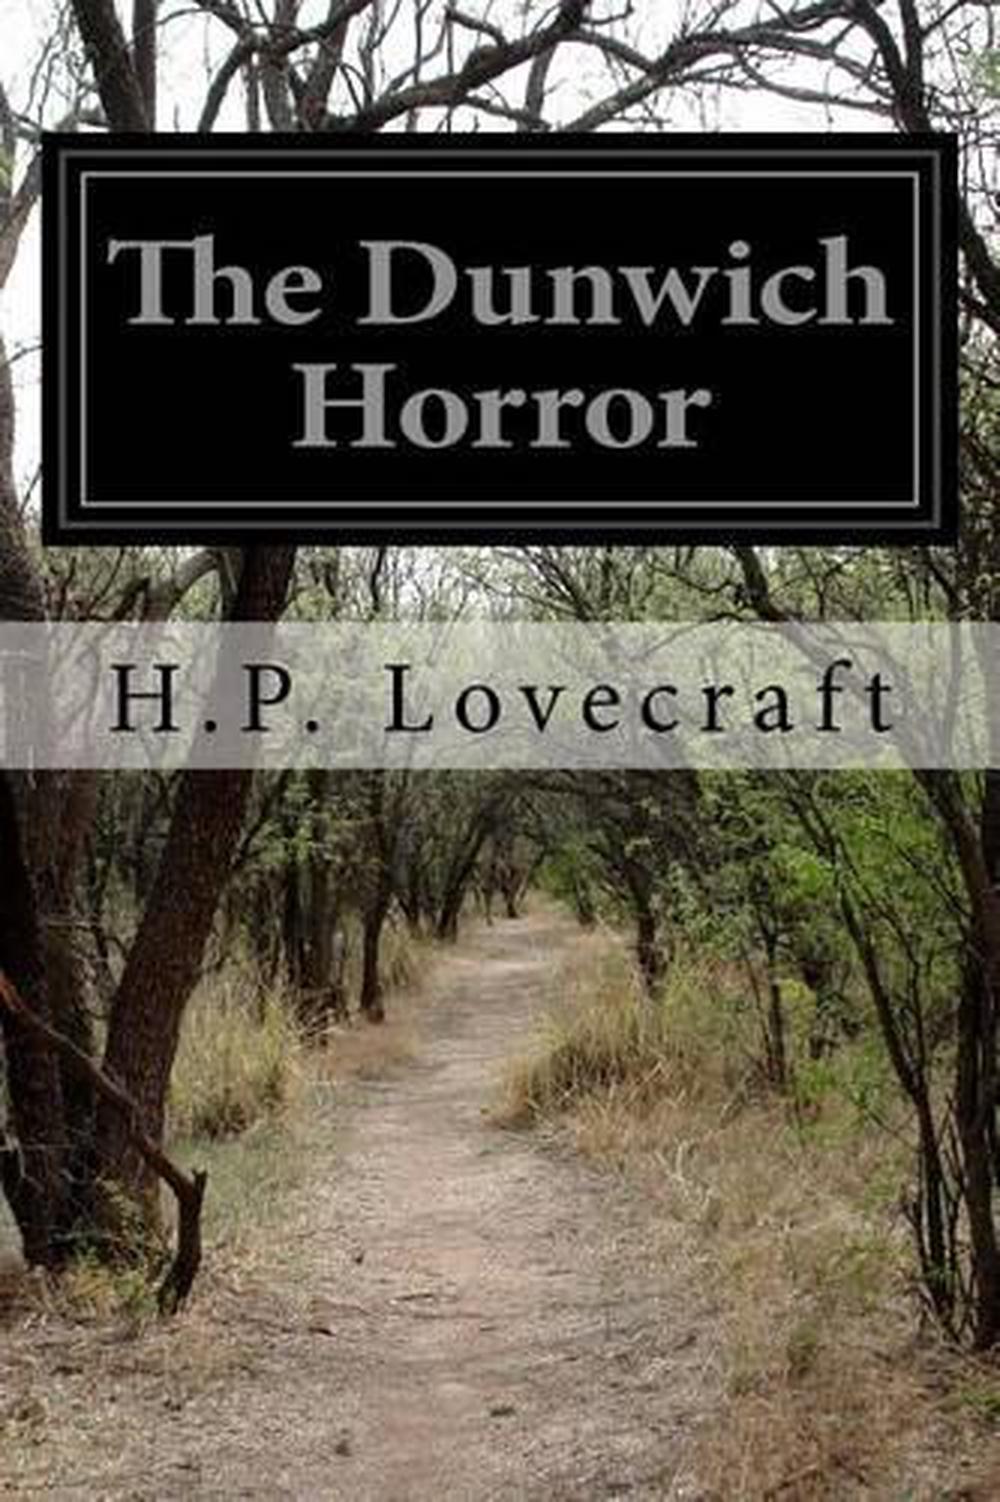 The Dunwich Horror and Other Stories by H.P. Lovecraft